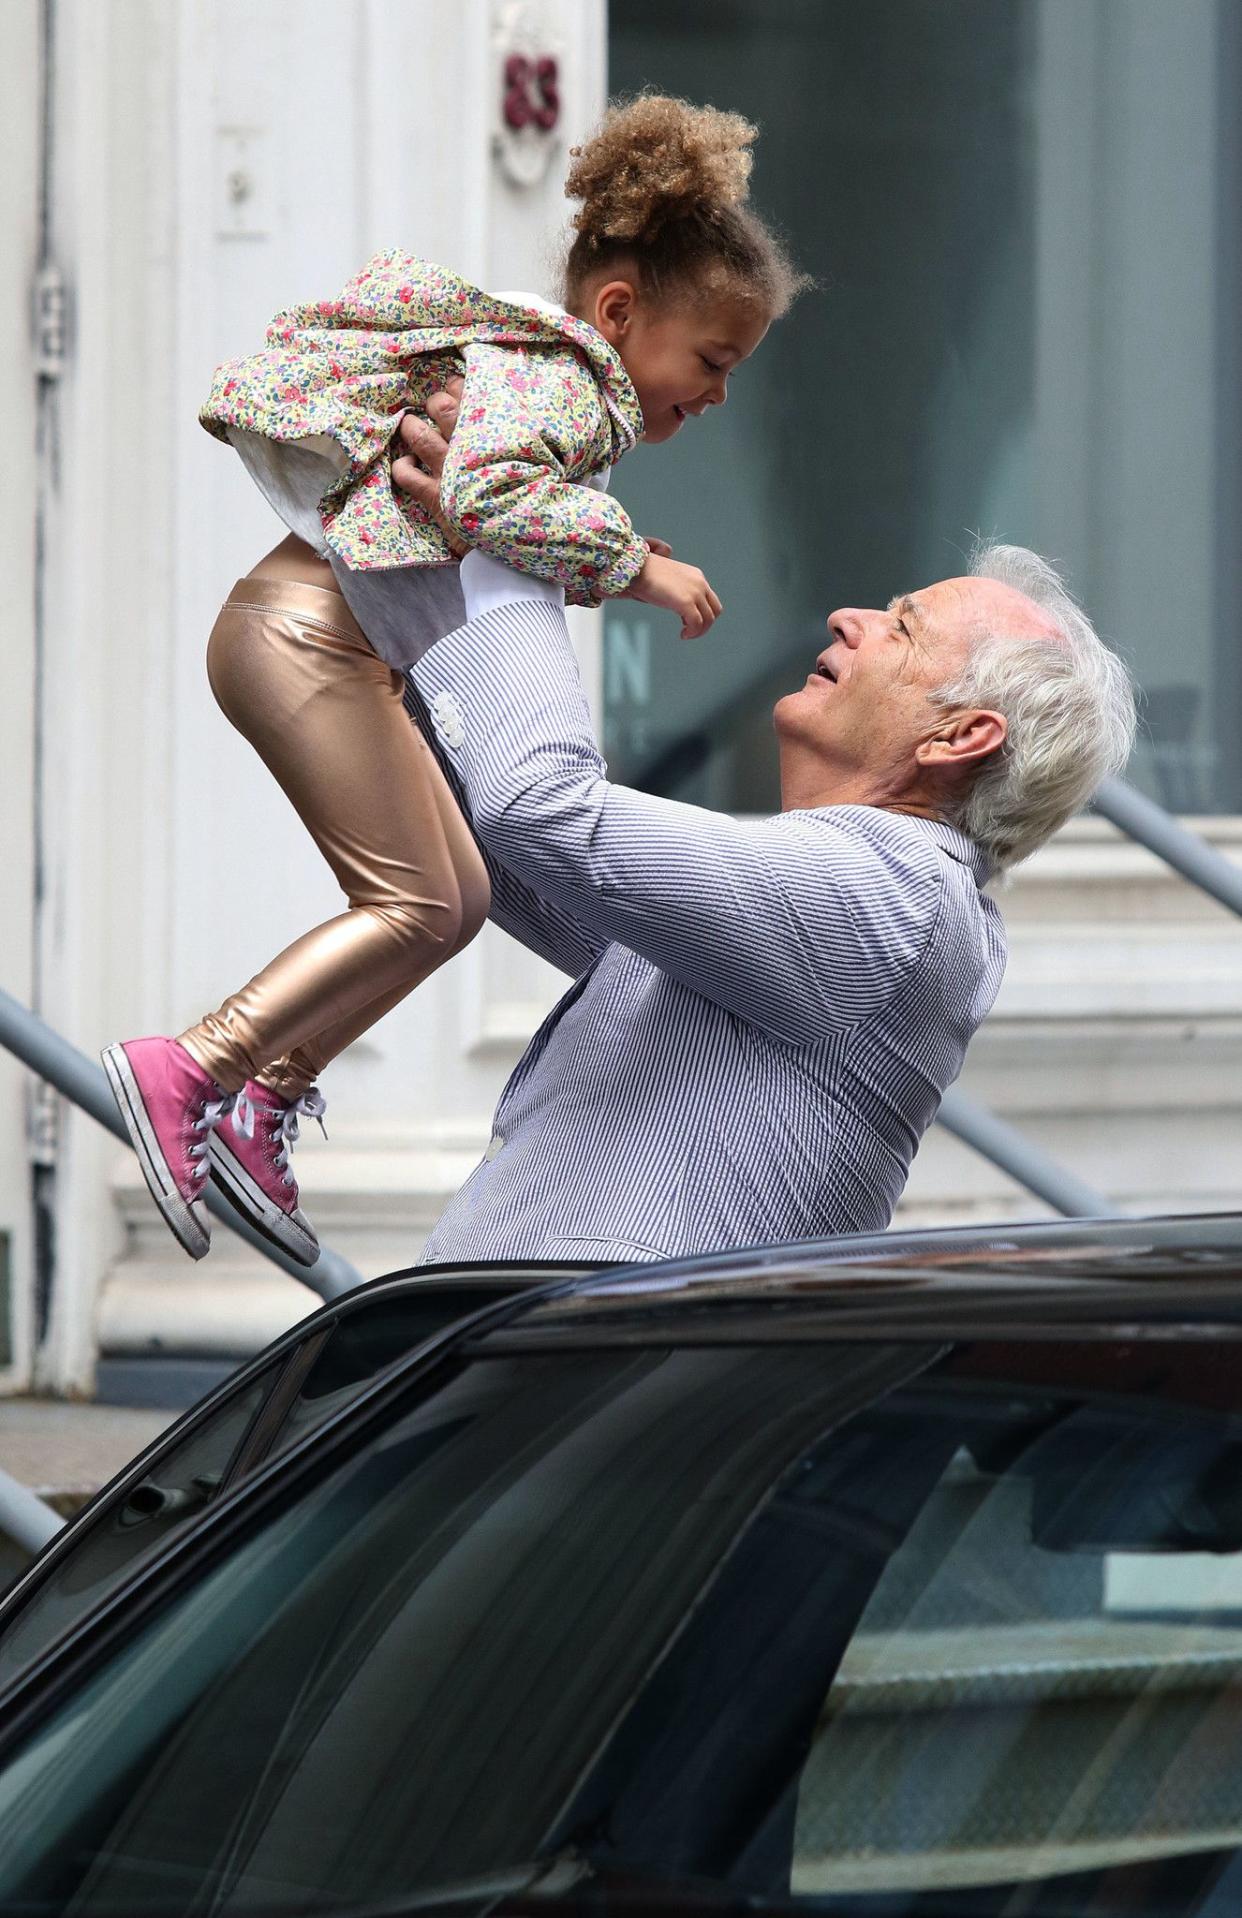 Bill Murray then greeted a smaller co-star, presumably his character's granddaughter, with a playful lift in the air.